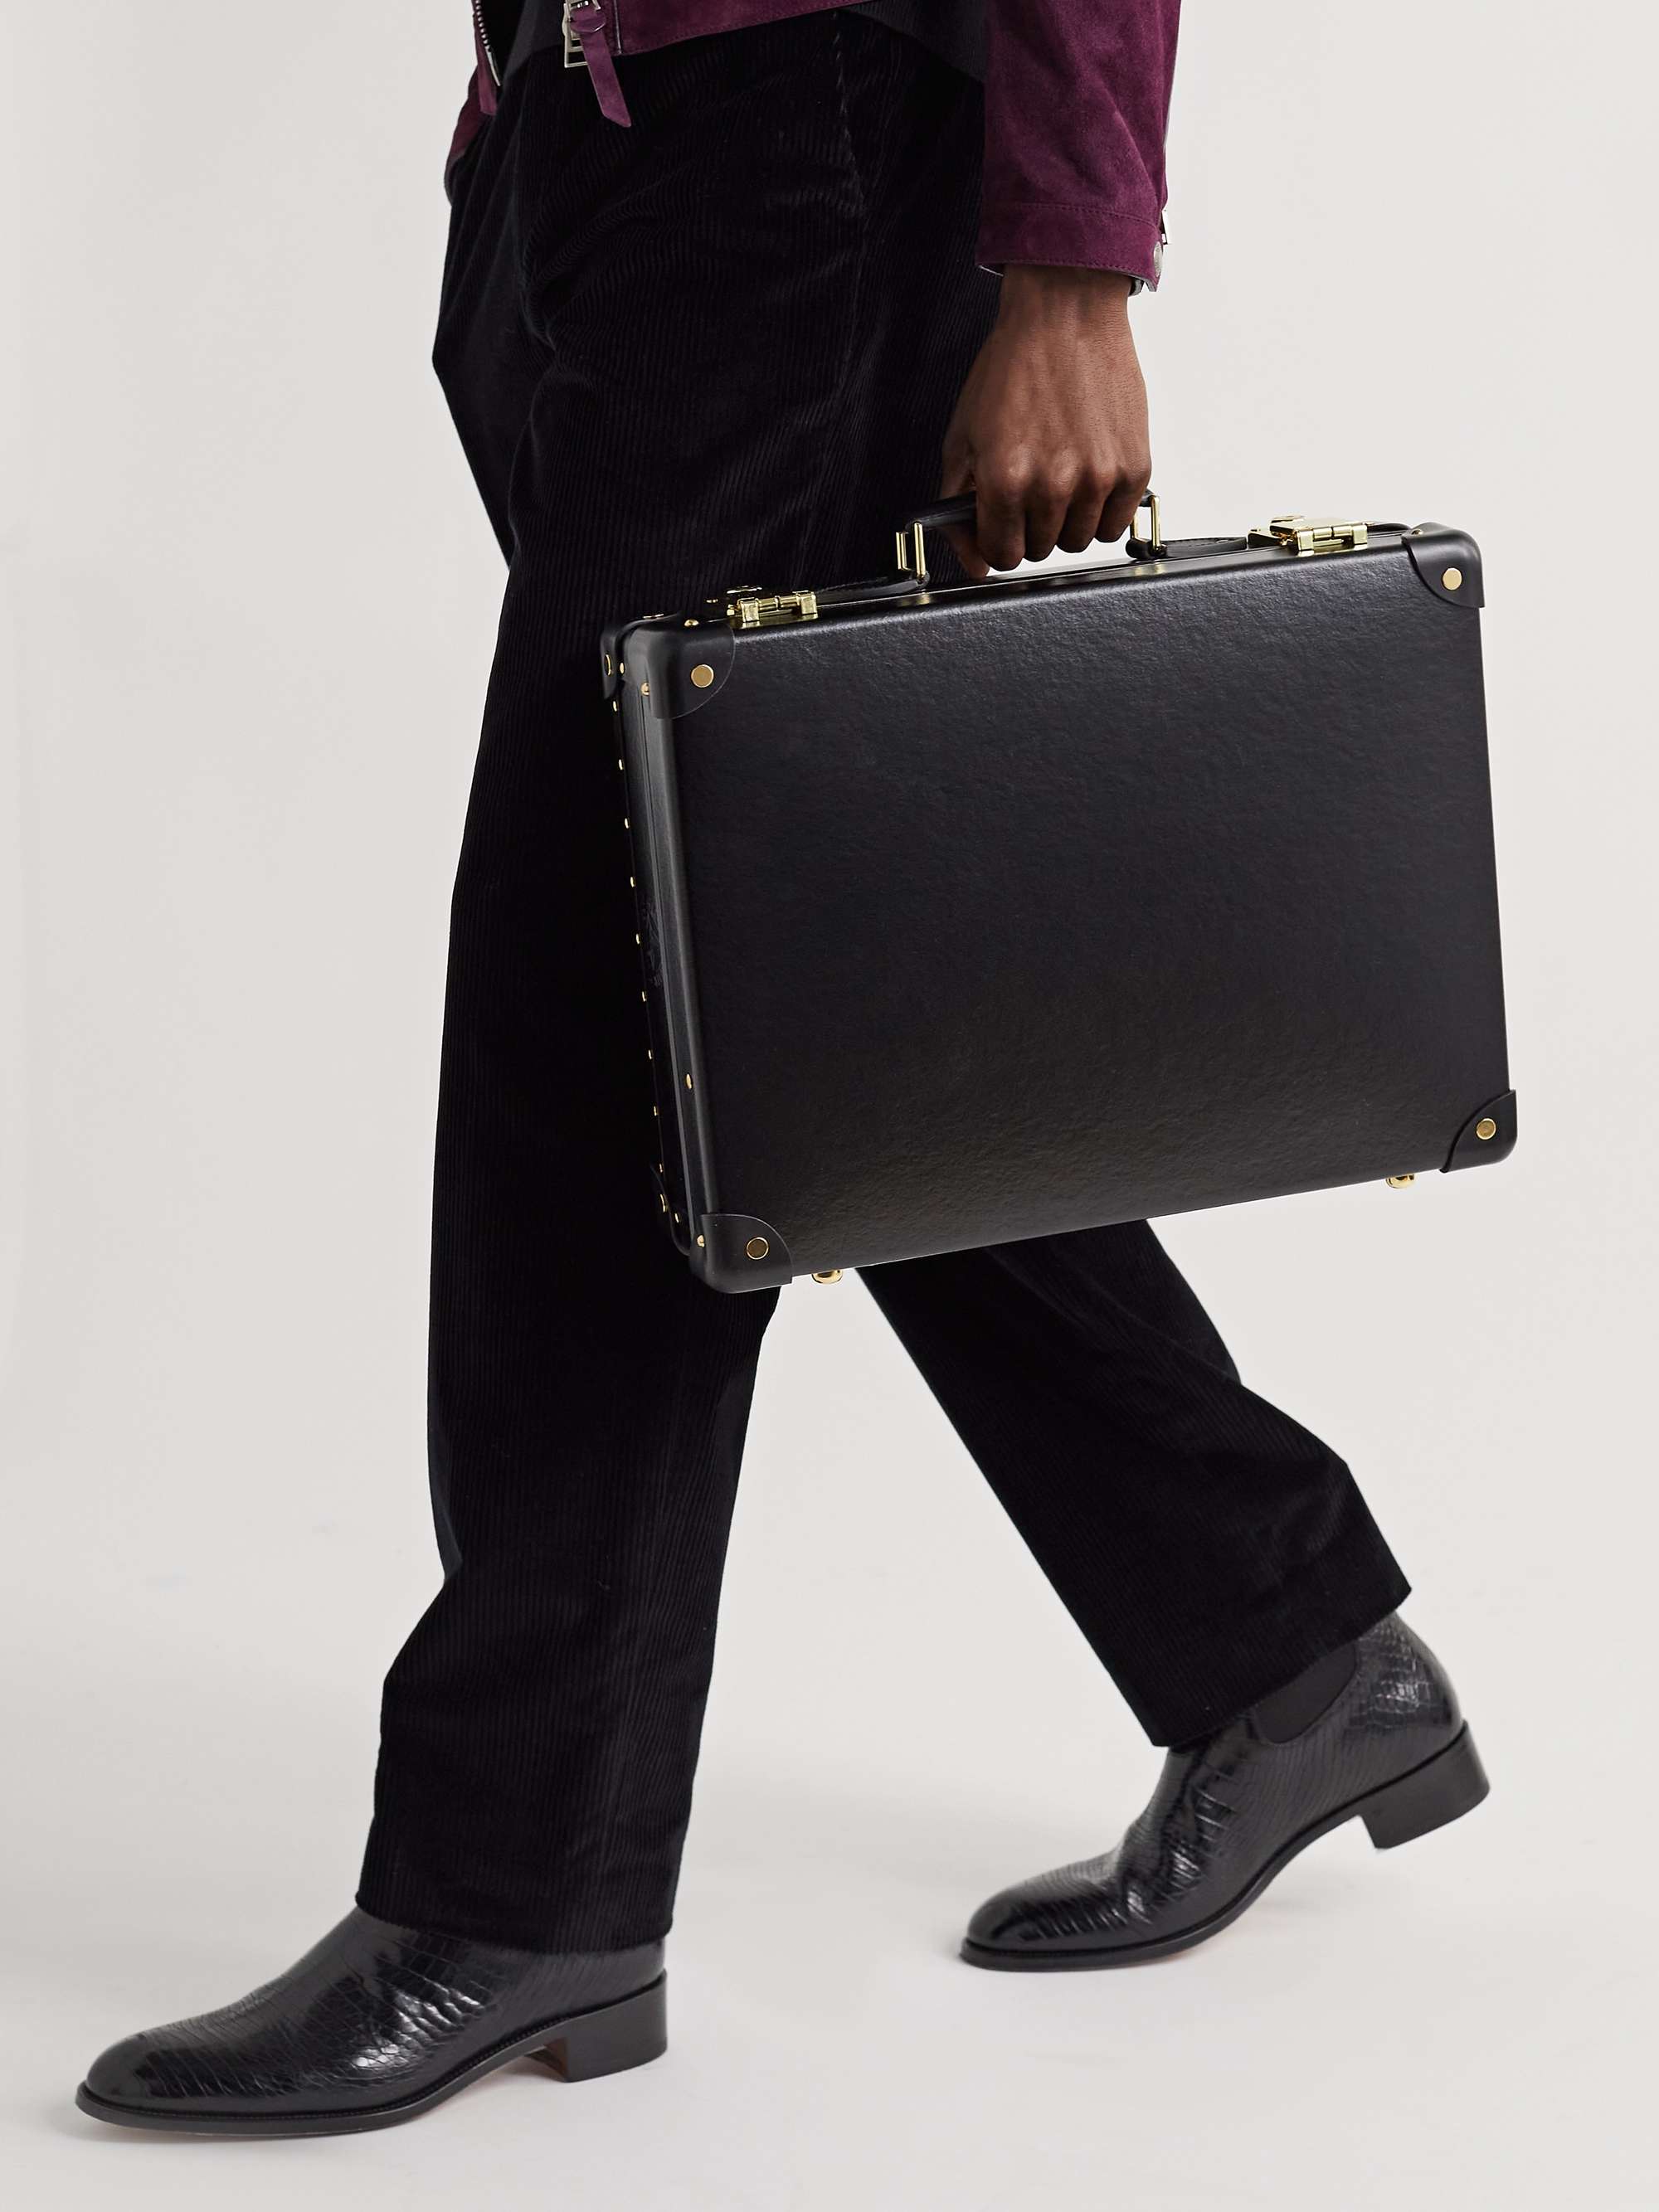 GLOBE-TROTTER Centenary Leather-Trimmed Briefcase